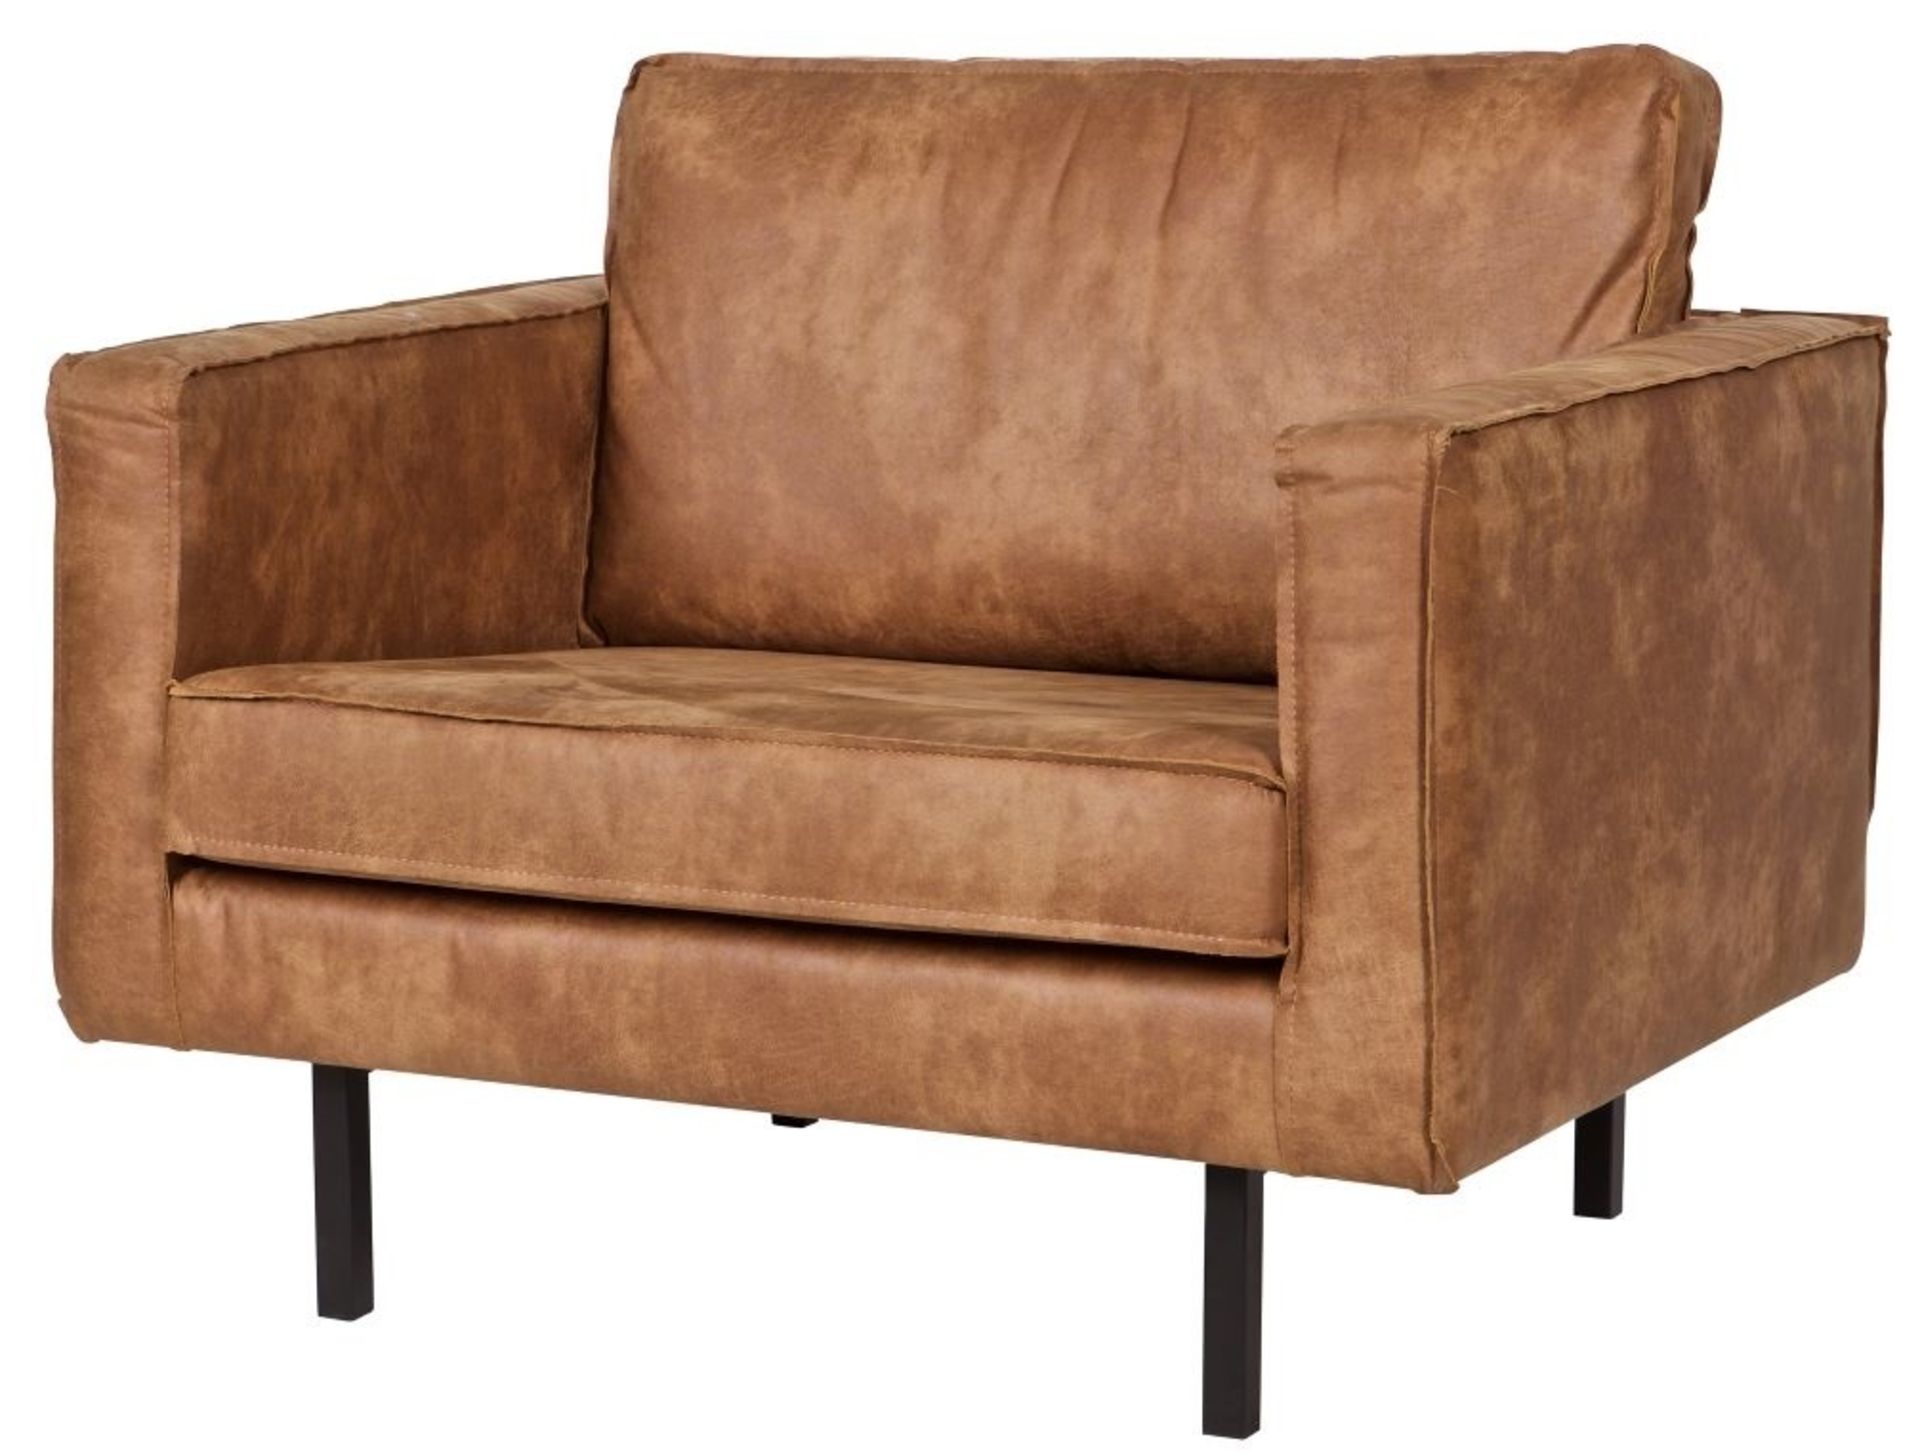 1 x 'Rodeo' Contemporary Leather Armchair In Cognac Brown - Dimensions: H:85 x W:277 x D:86 cm - - Image 3 of 4